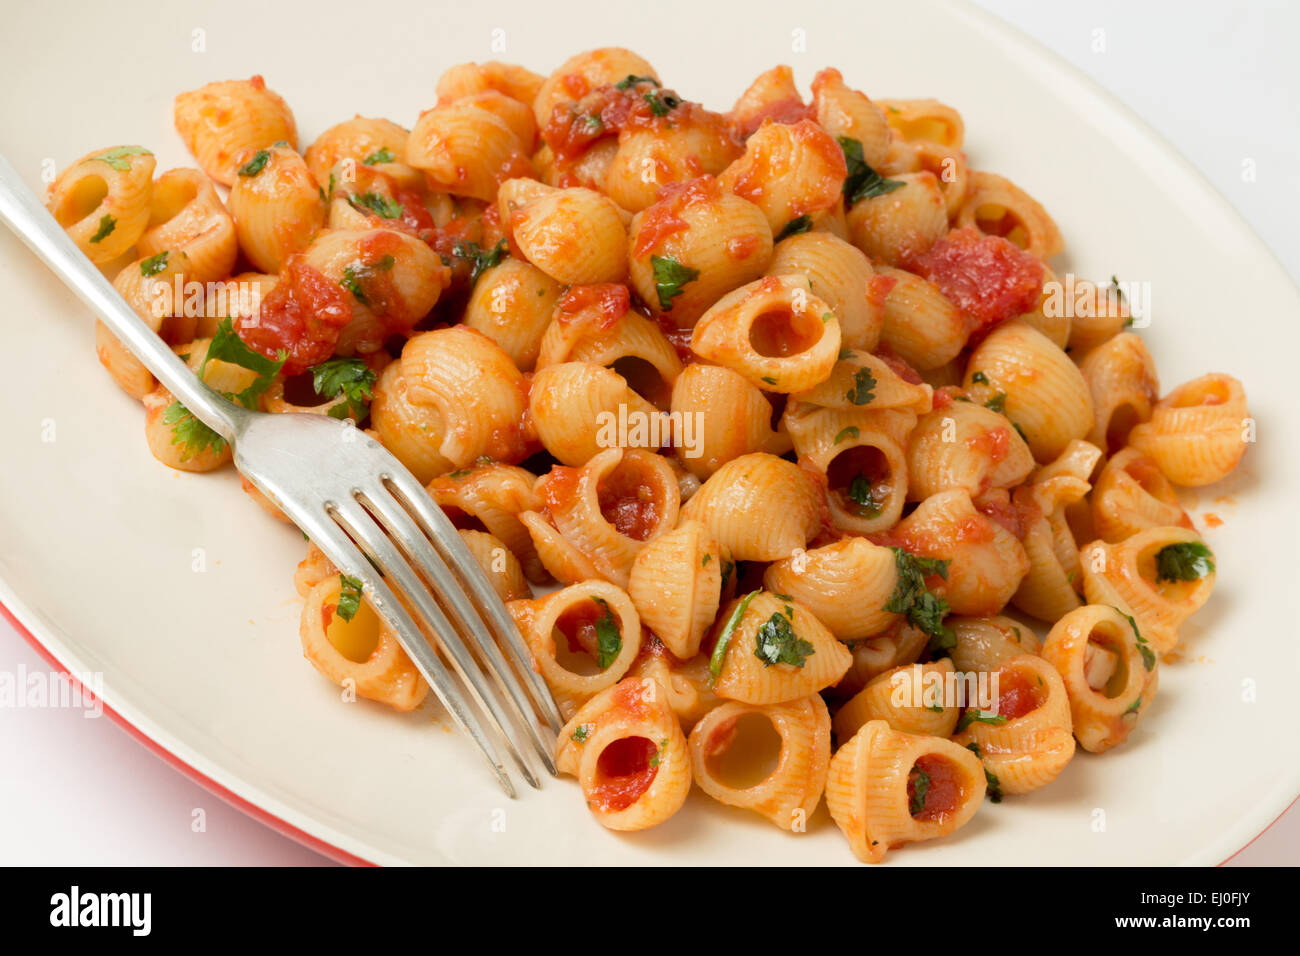 Gomiti elbow pasta shells tossed in arrabbiata tomato, garlic and chili sauce and served with chopped parsley Stock Photo